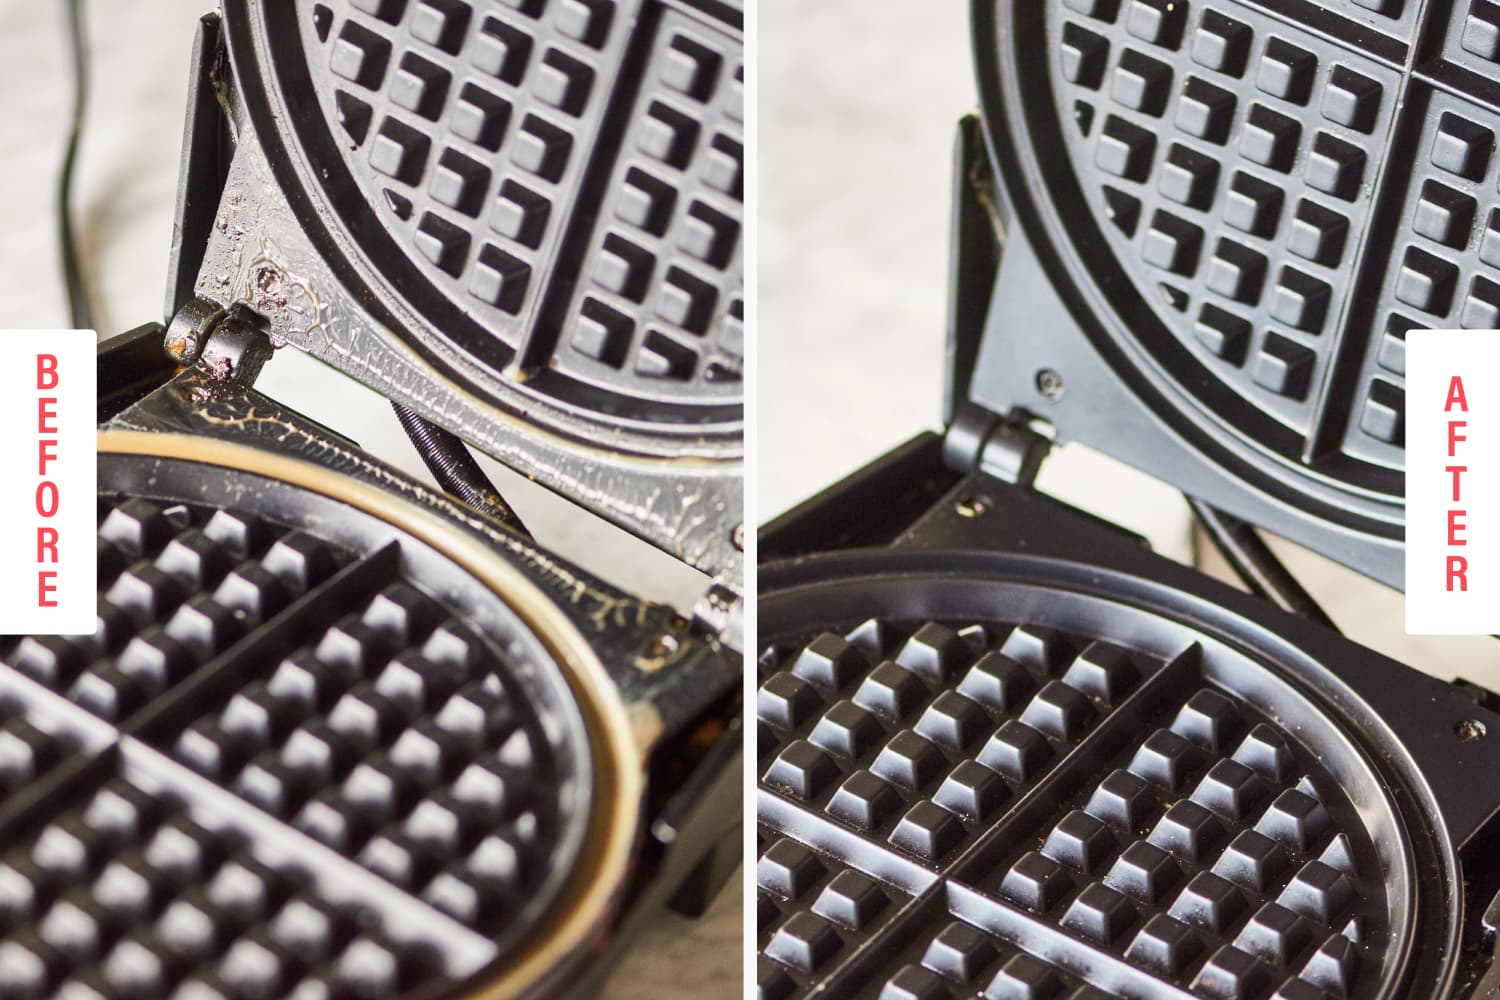 How to Clean a Waffle Maker